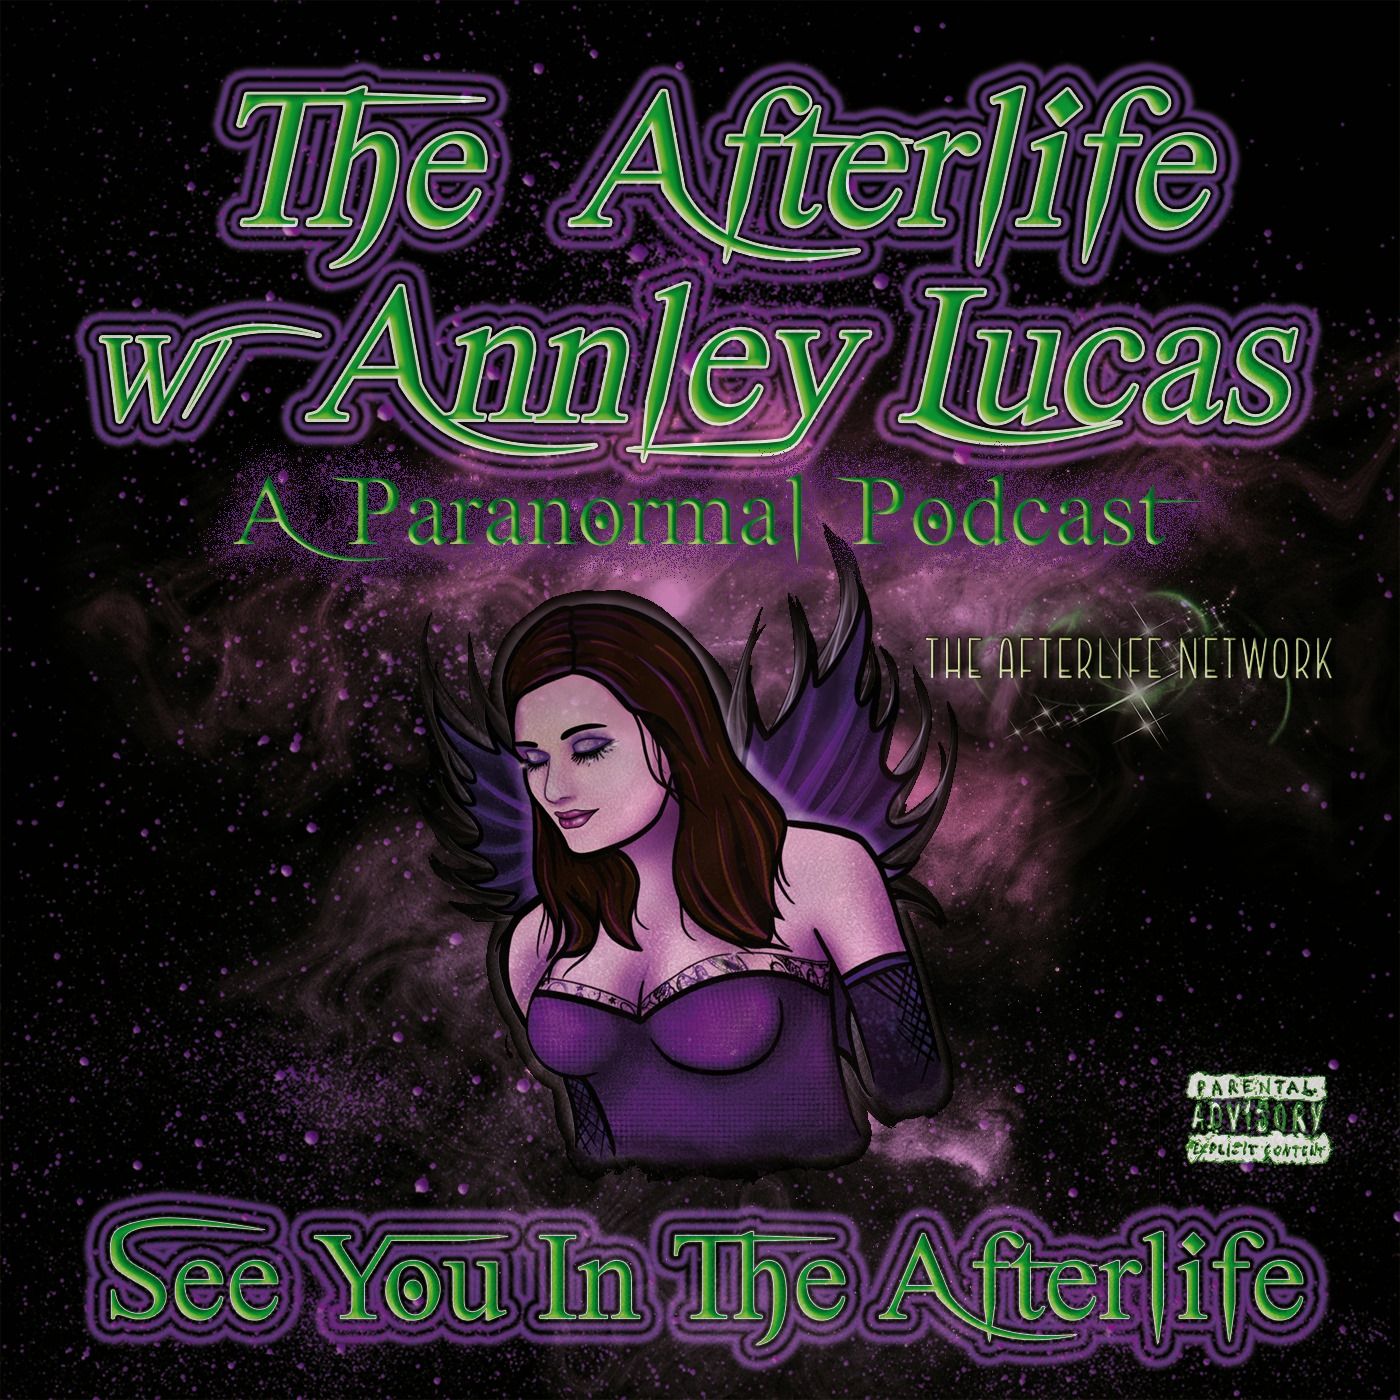 The AfterLife W/ Annley Lucas